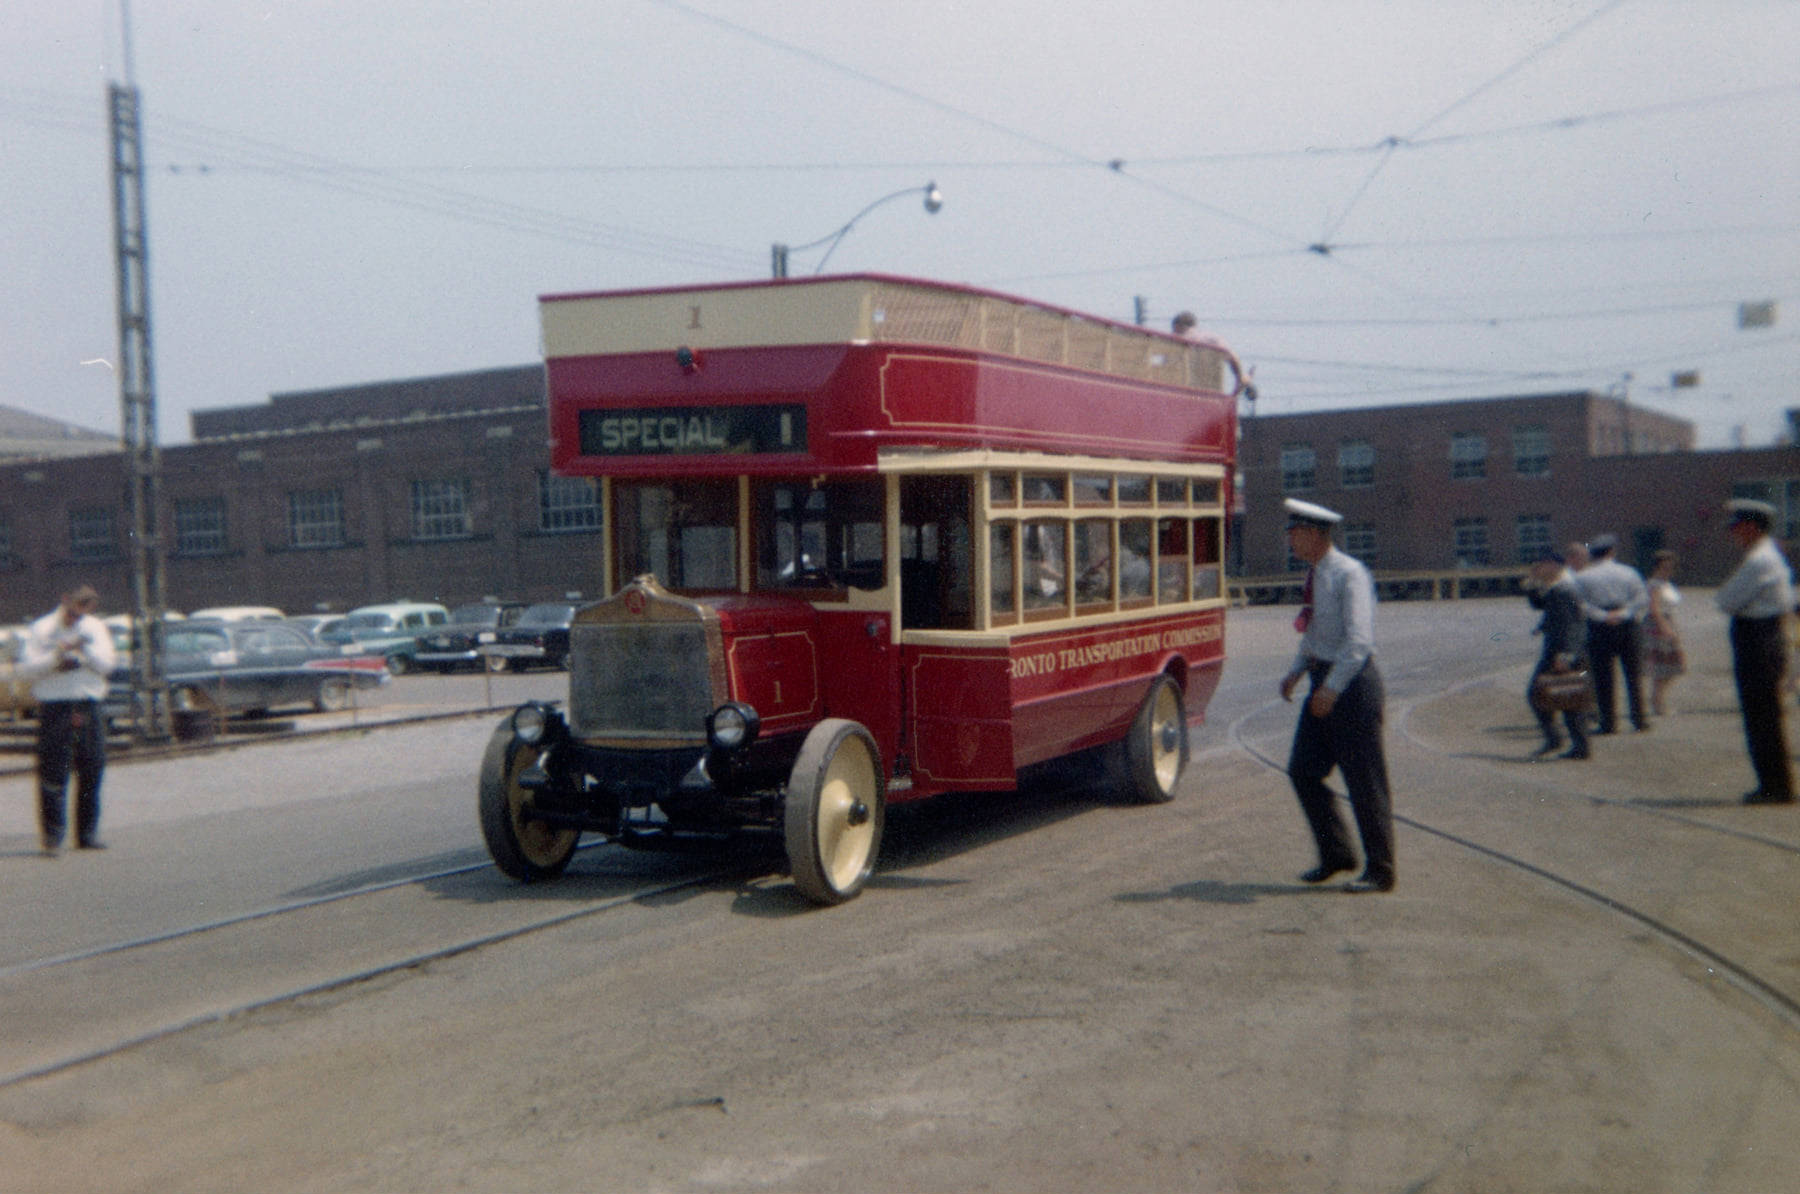 TTC double-decker bus No. 1, on special excursion. Photo taken in front of the TTC's Hillcrest Shops in Toronto, 1980s